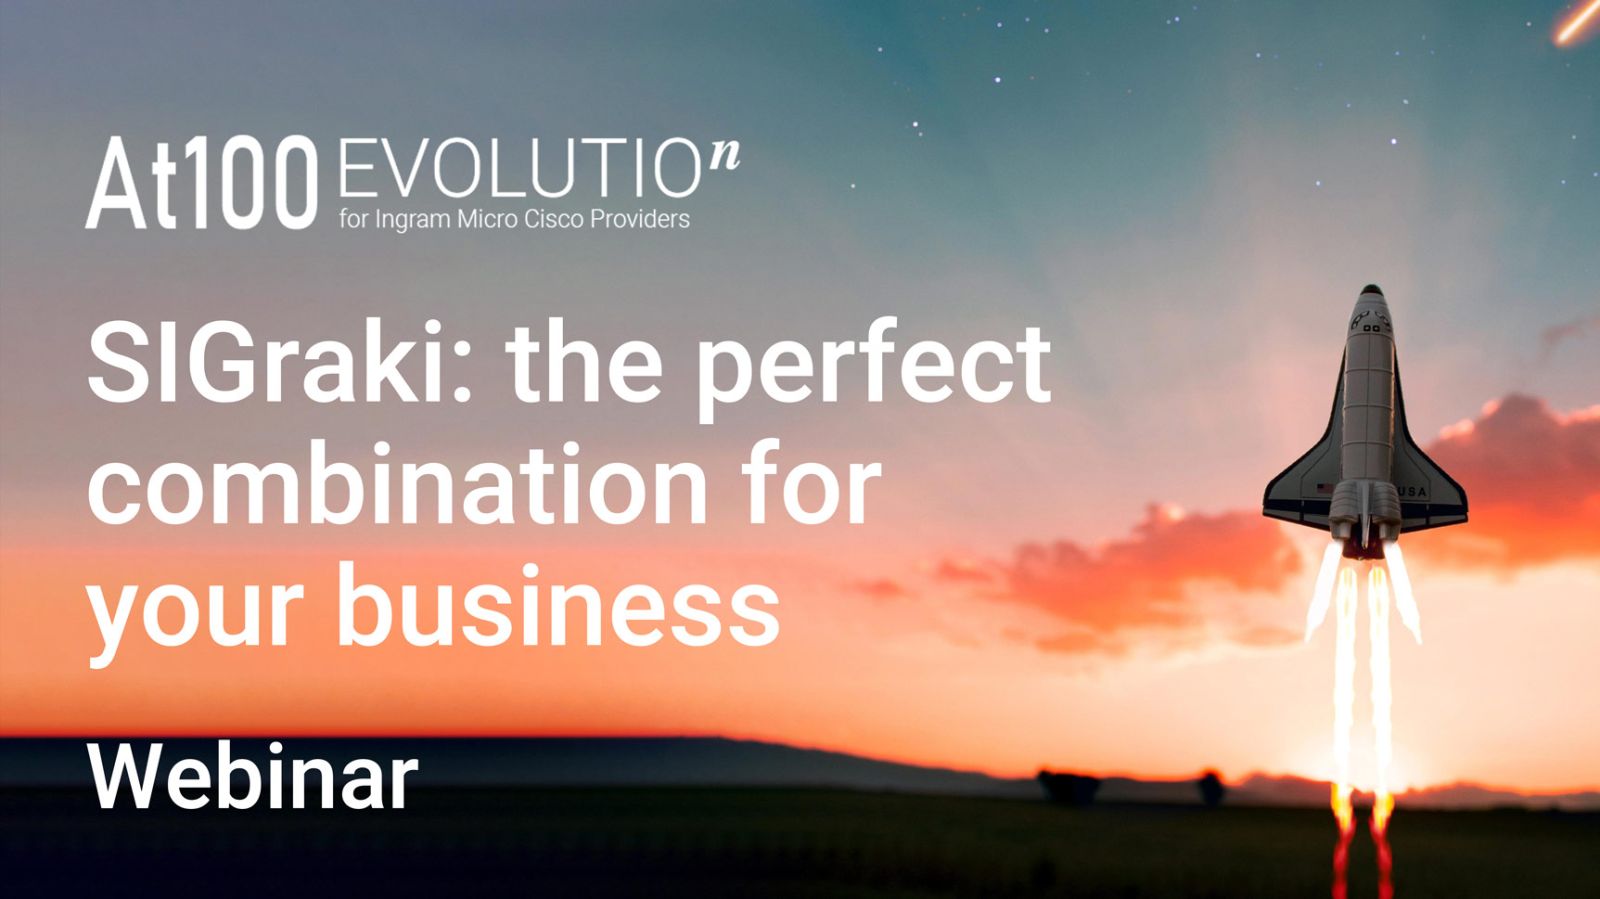 SIGraki, the perfect combination for your business Featured Image